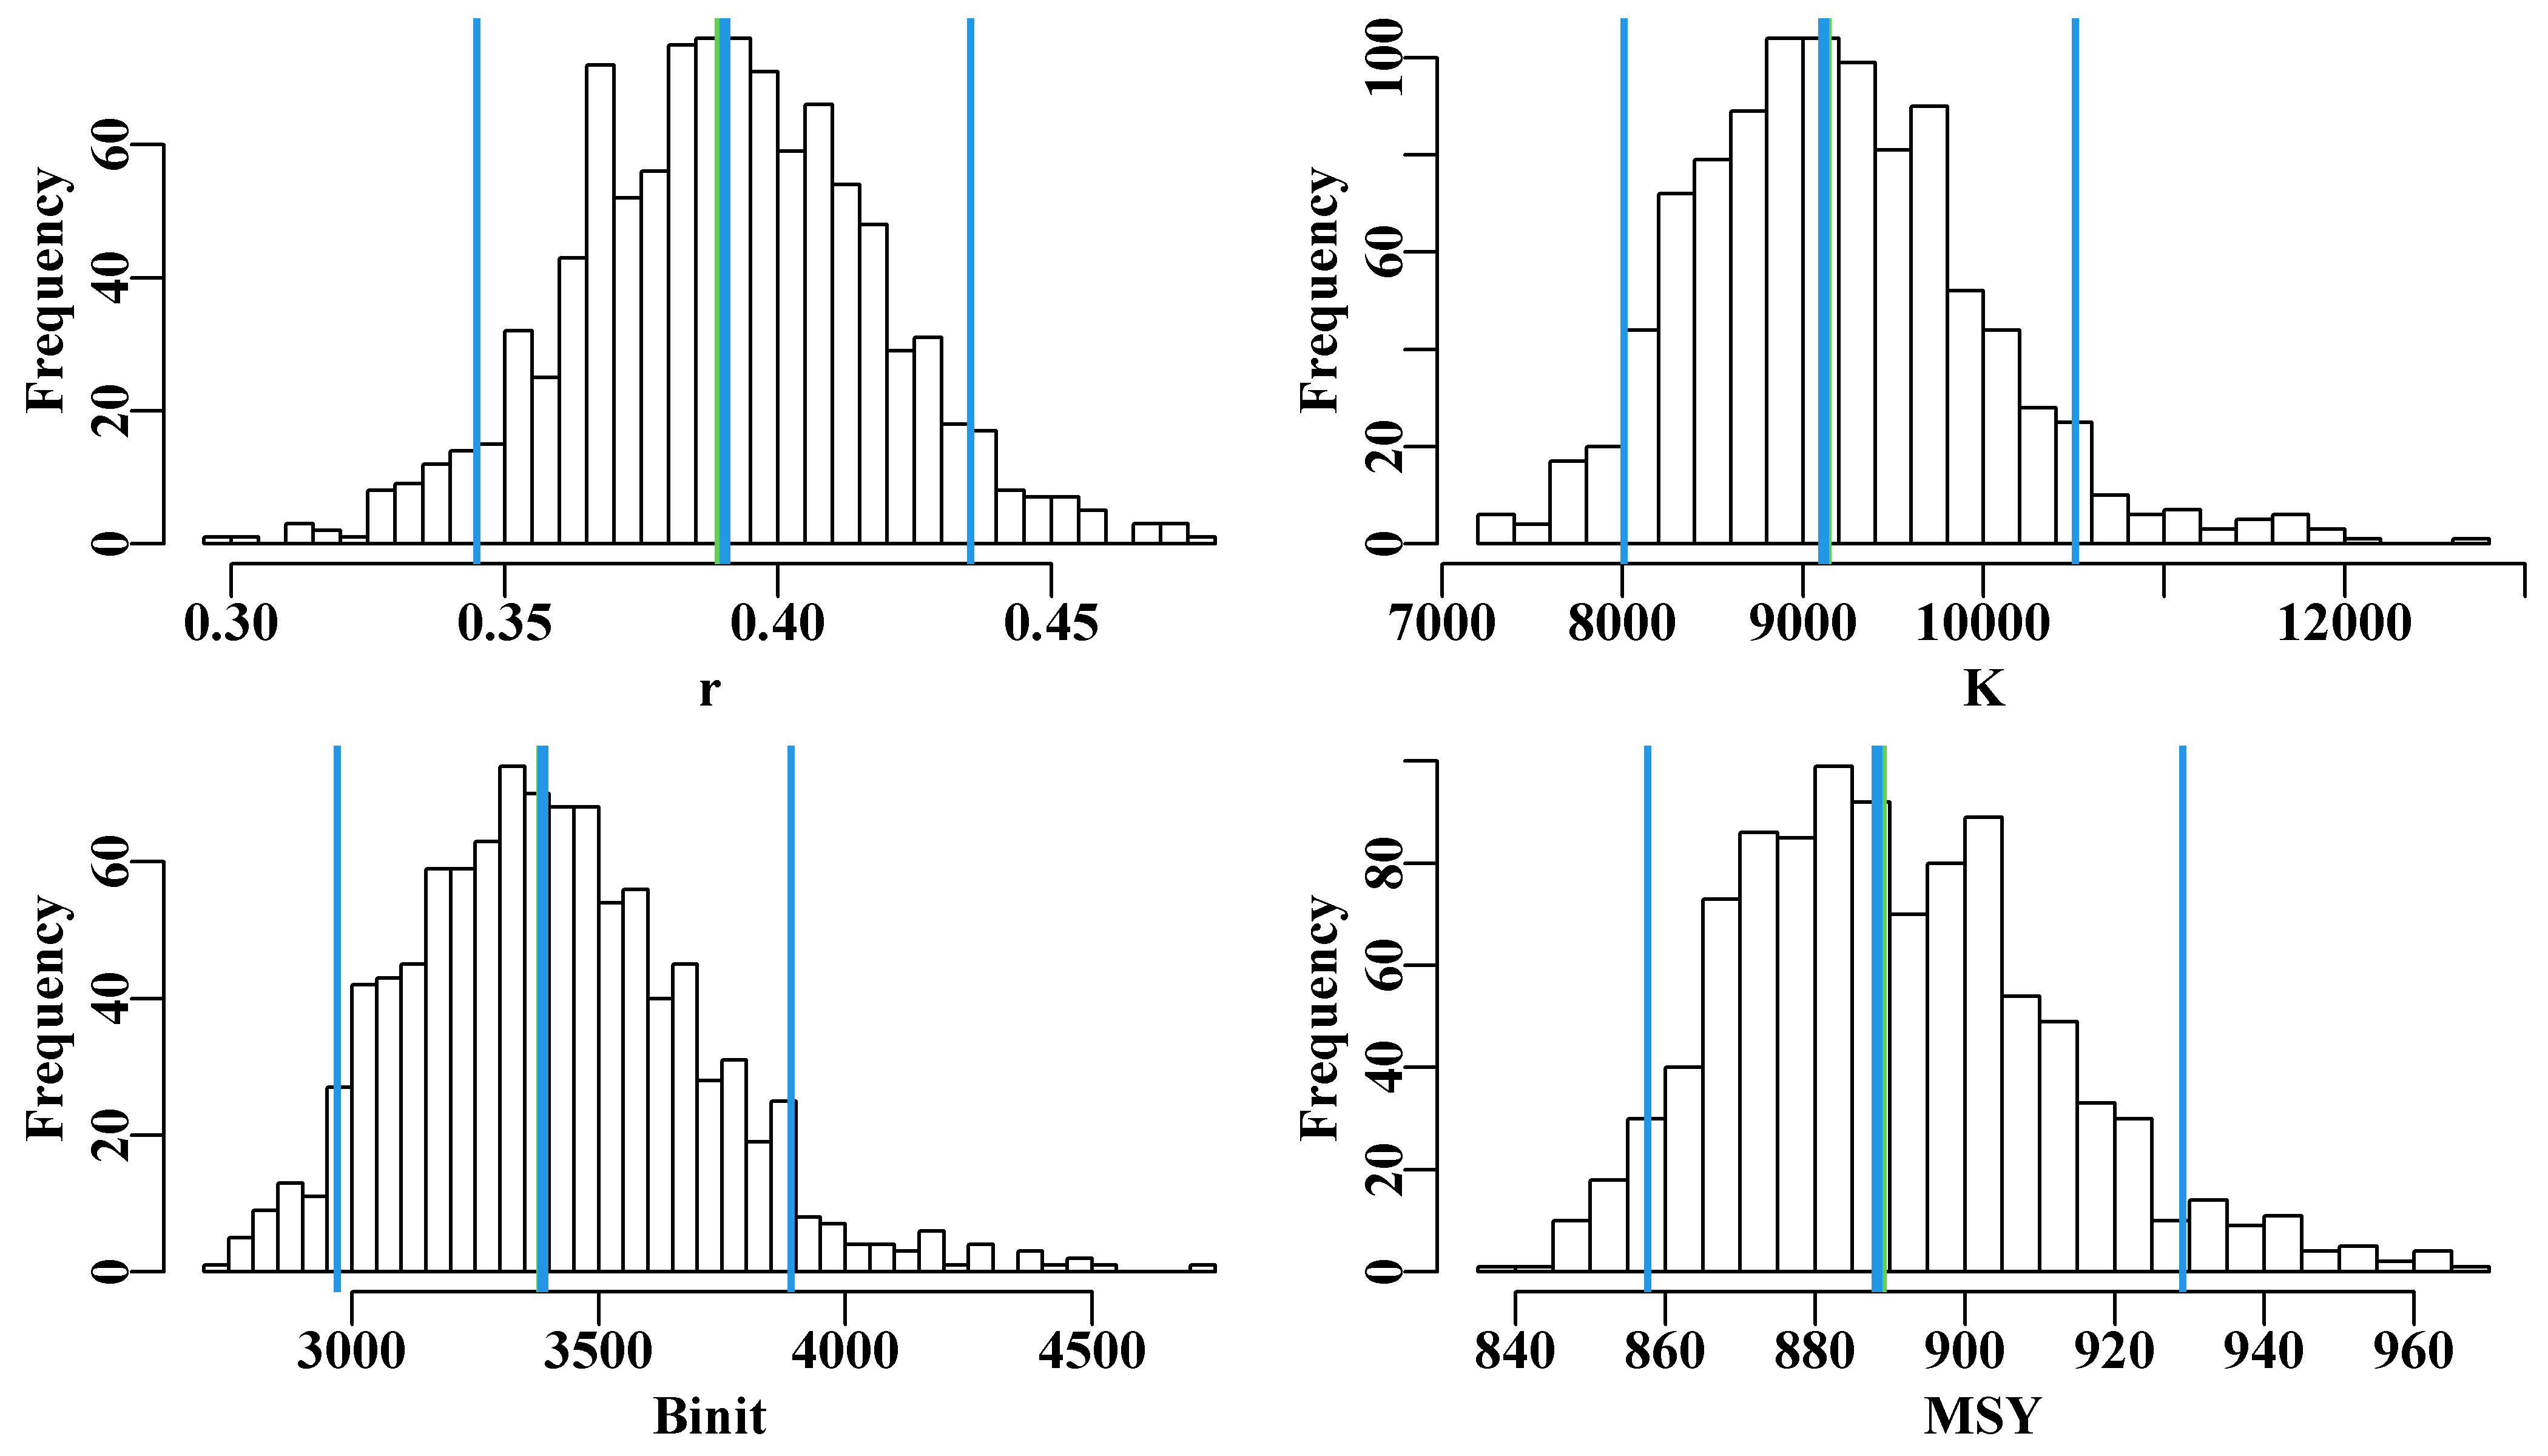 The 1000 bootstrap estimates of each of the first three model parameters and MSY as histograms. In each plot the two fine outer lines define the inner 90% confidence bounds around the median, the central vertical line denotes the optimum estimates, but these are generally immediately below the medians, except for the Binit.